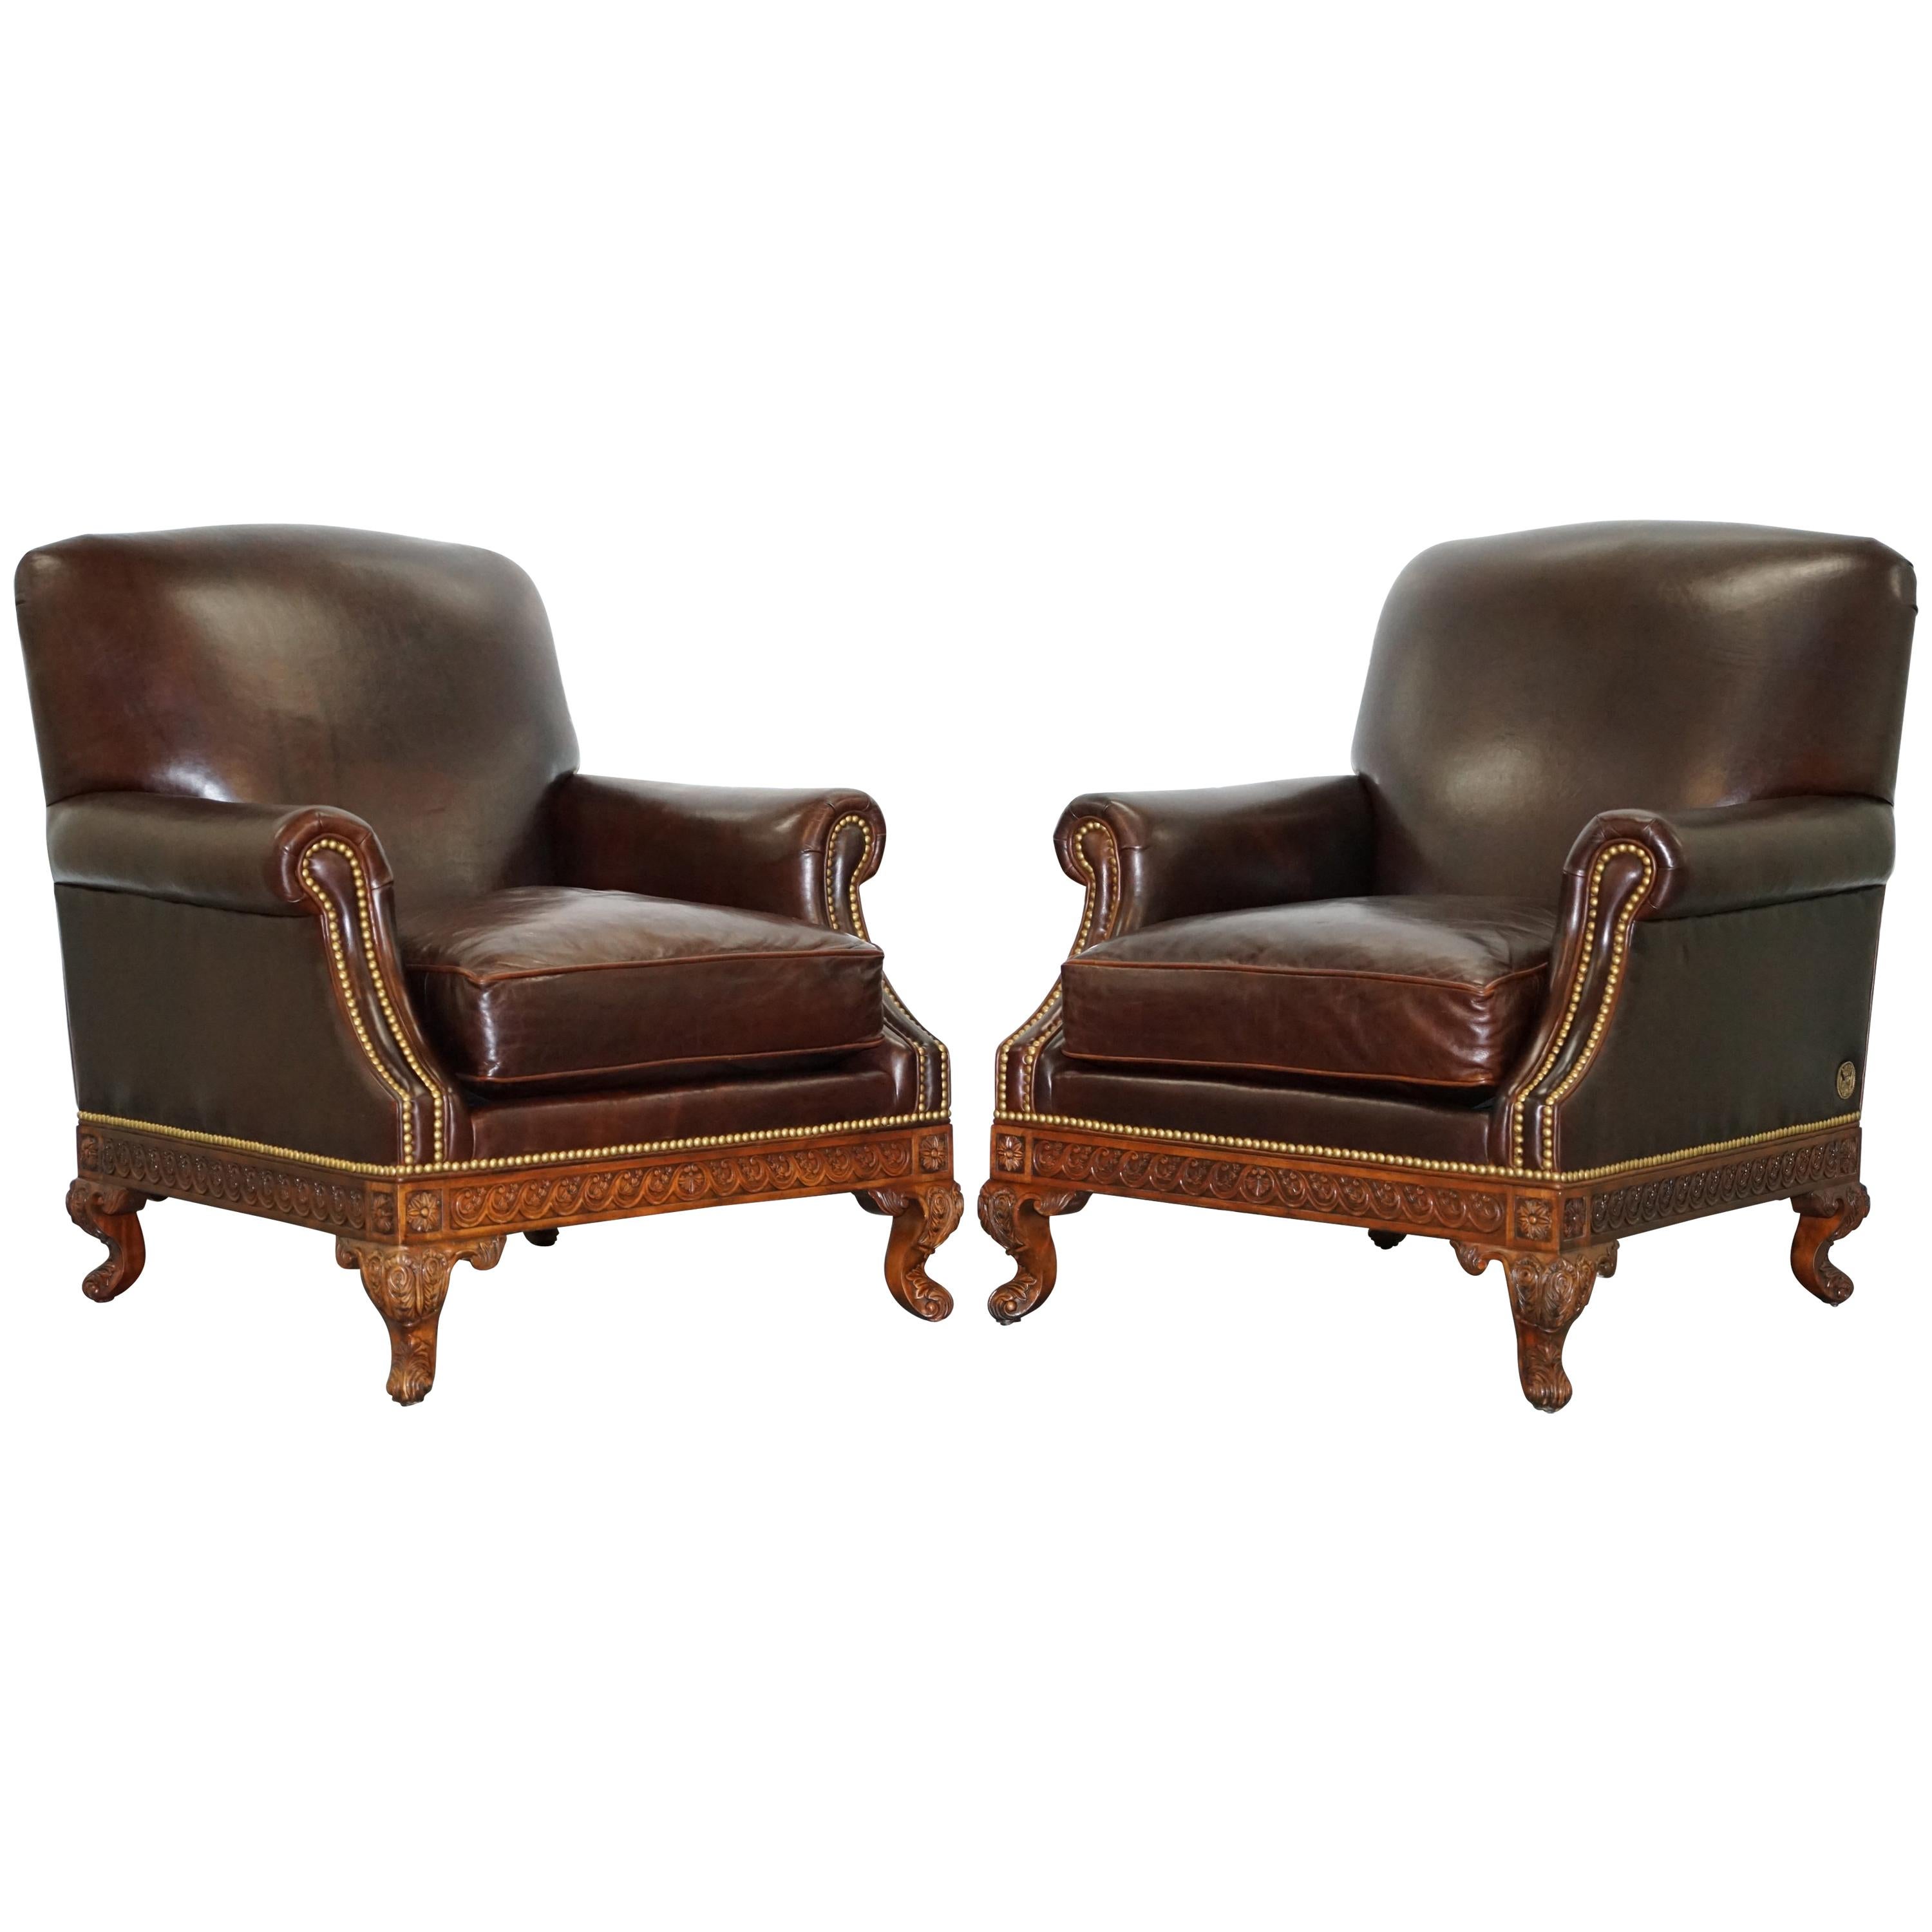 Rare Pair of Althorp Estate Leather Armchairs Princess Diana's Family Home